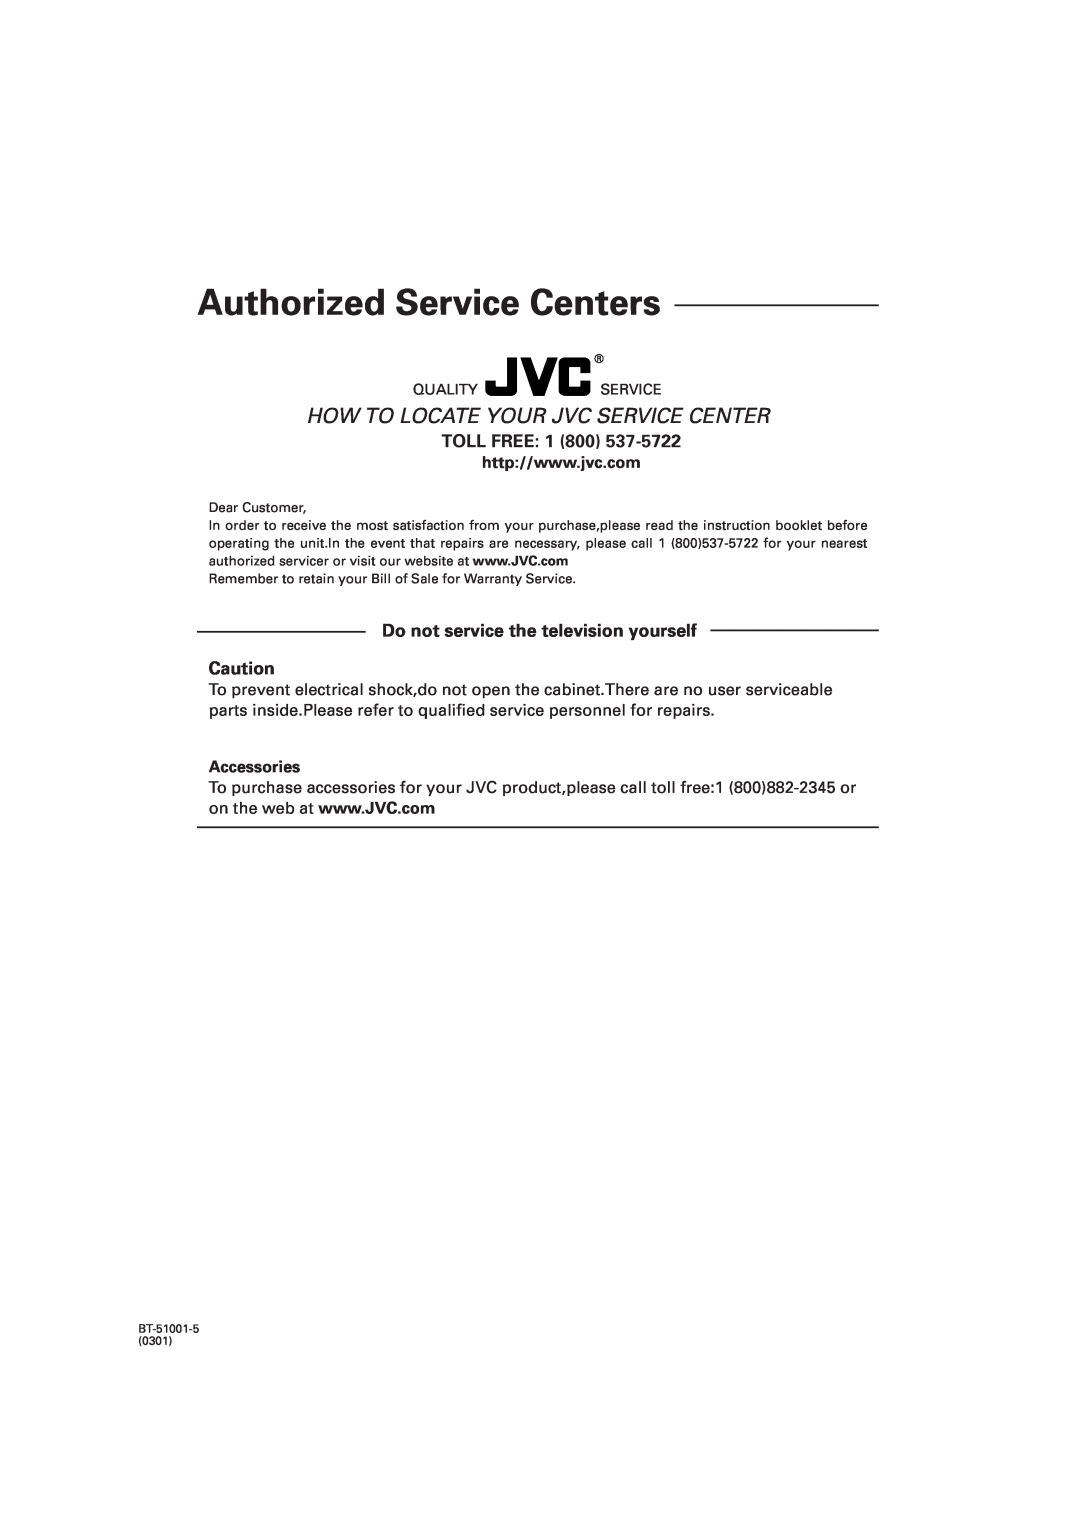 JVC CA-FSS57, GVT0134-001B manual Toll Free, Do not service the television yourself, Authorized Service Centers, Accessories 